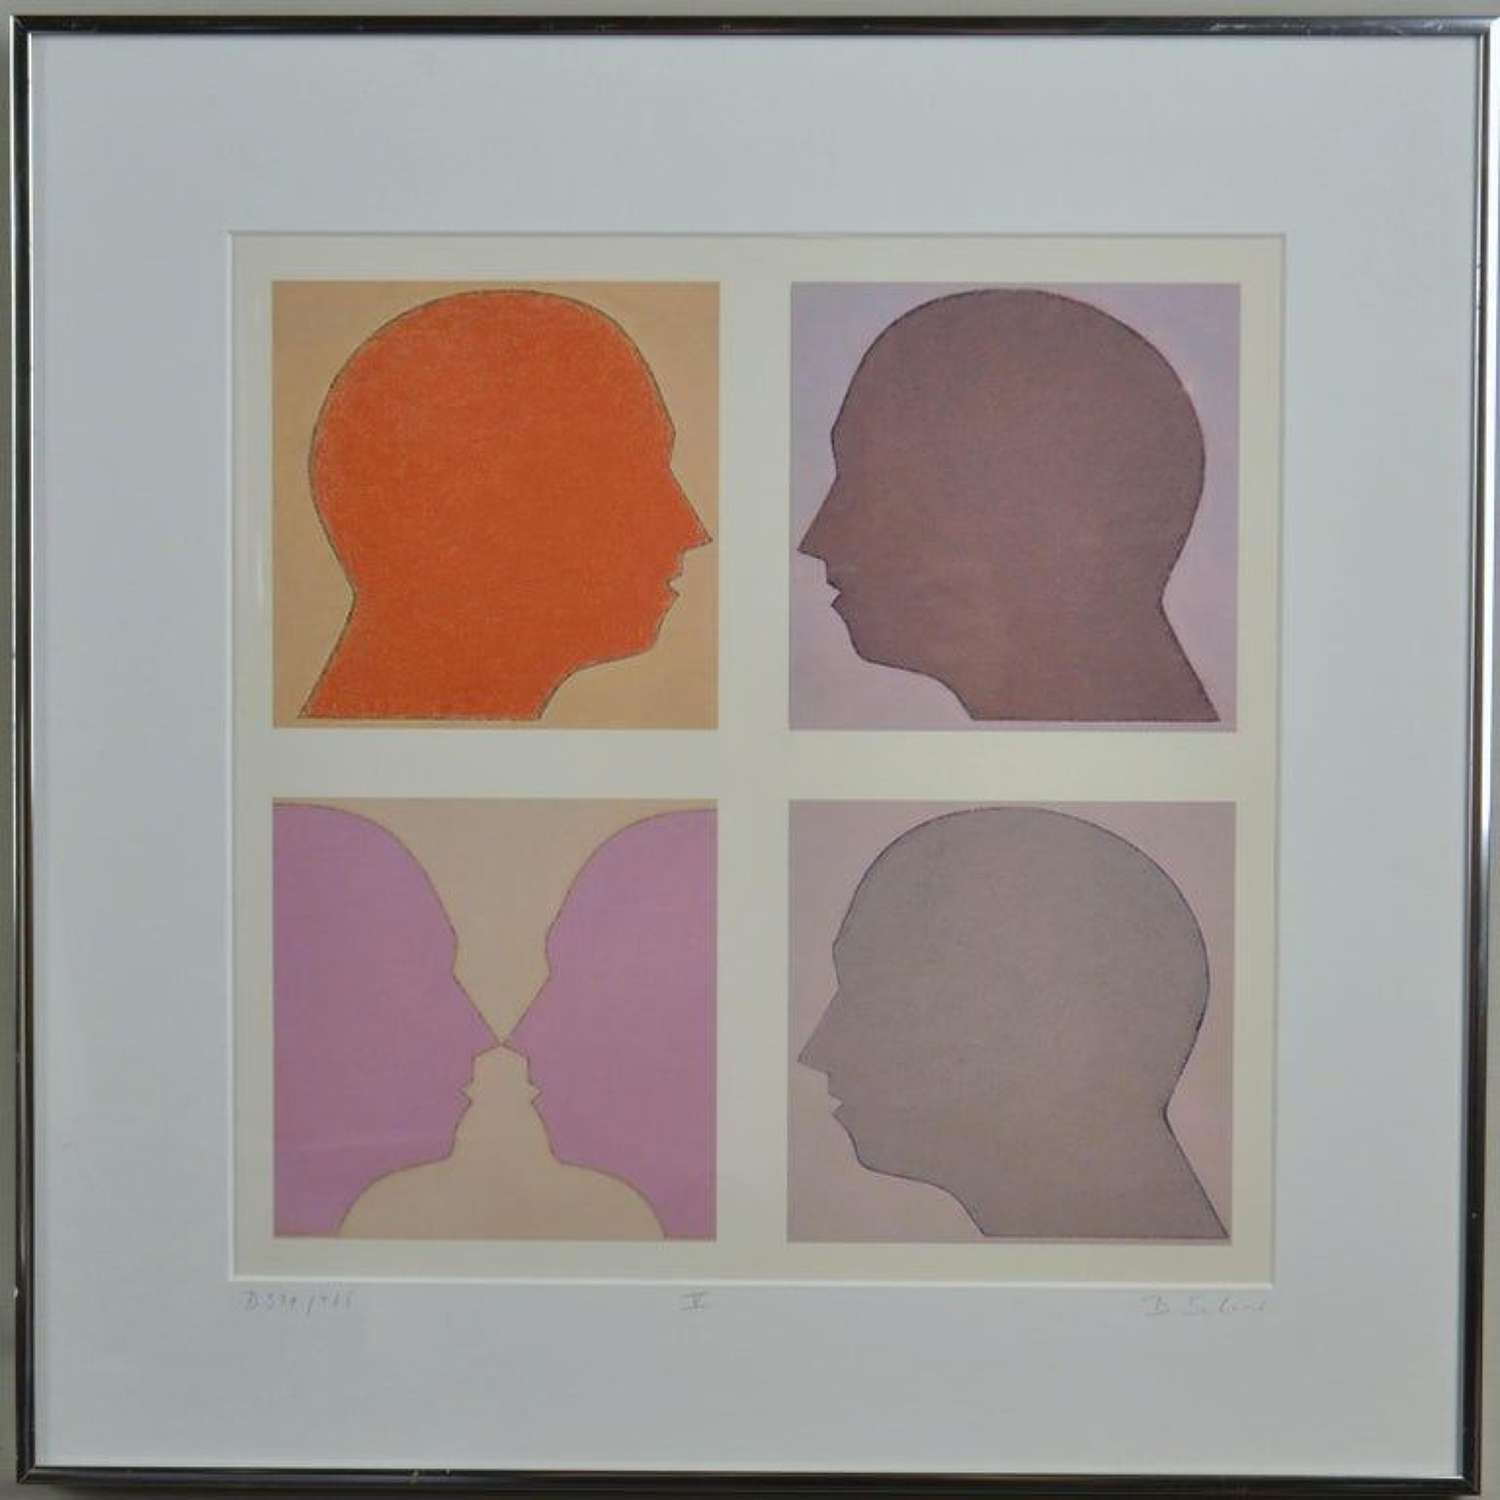 Lithograph of Silhouette Faces by Beate Selzer